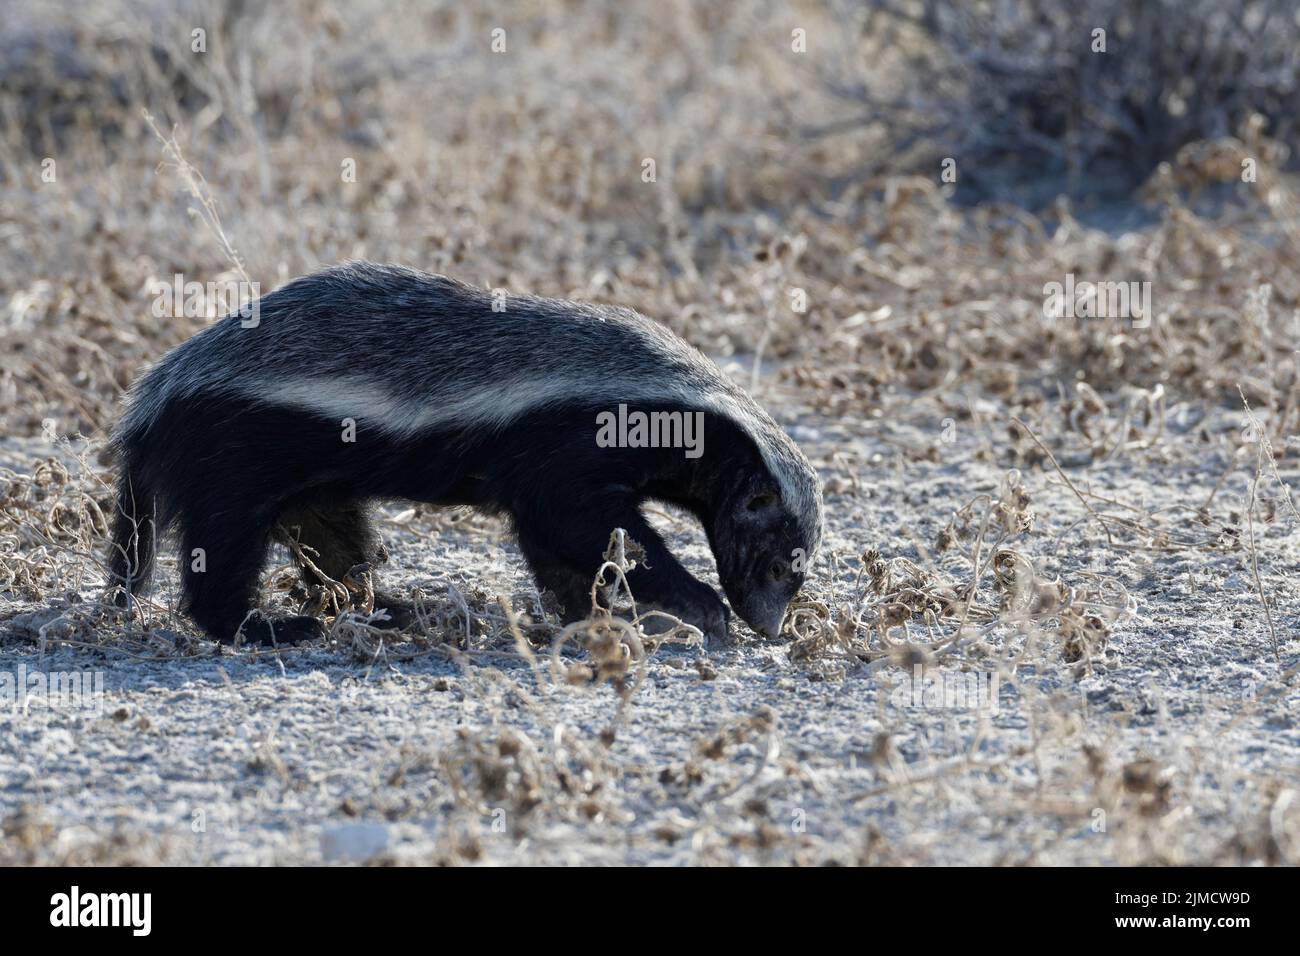 Honey badger (Mellivora capensis), adult male, in search of prey, Etosha National Park, Namibia, Africa Stock Photo